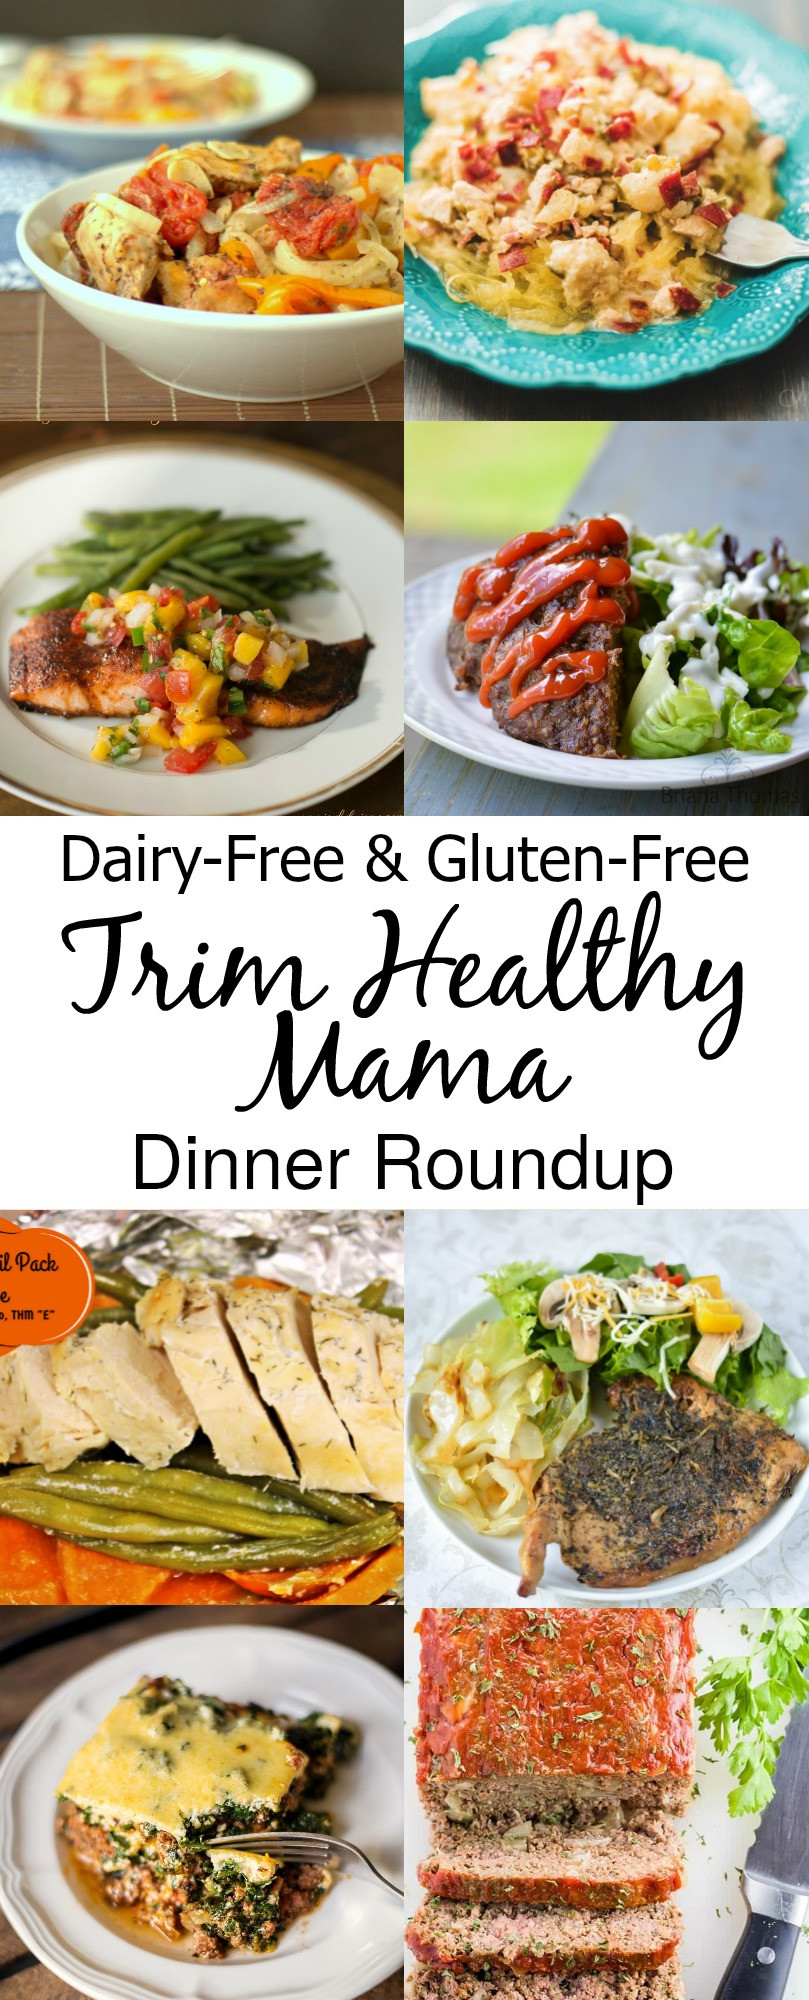 Dairy Free Recipes Dinner
 Dairy Free and Gluten Free Trim Healthy Mama Dinners